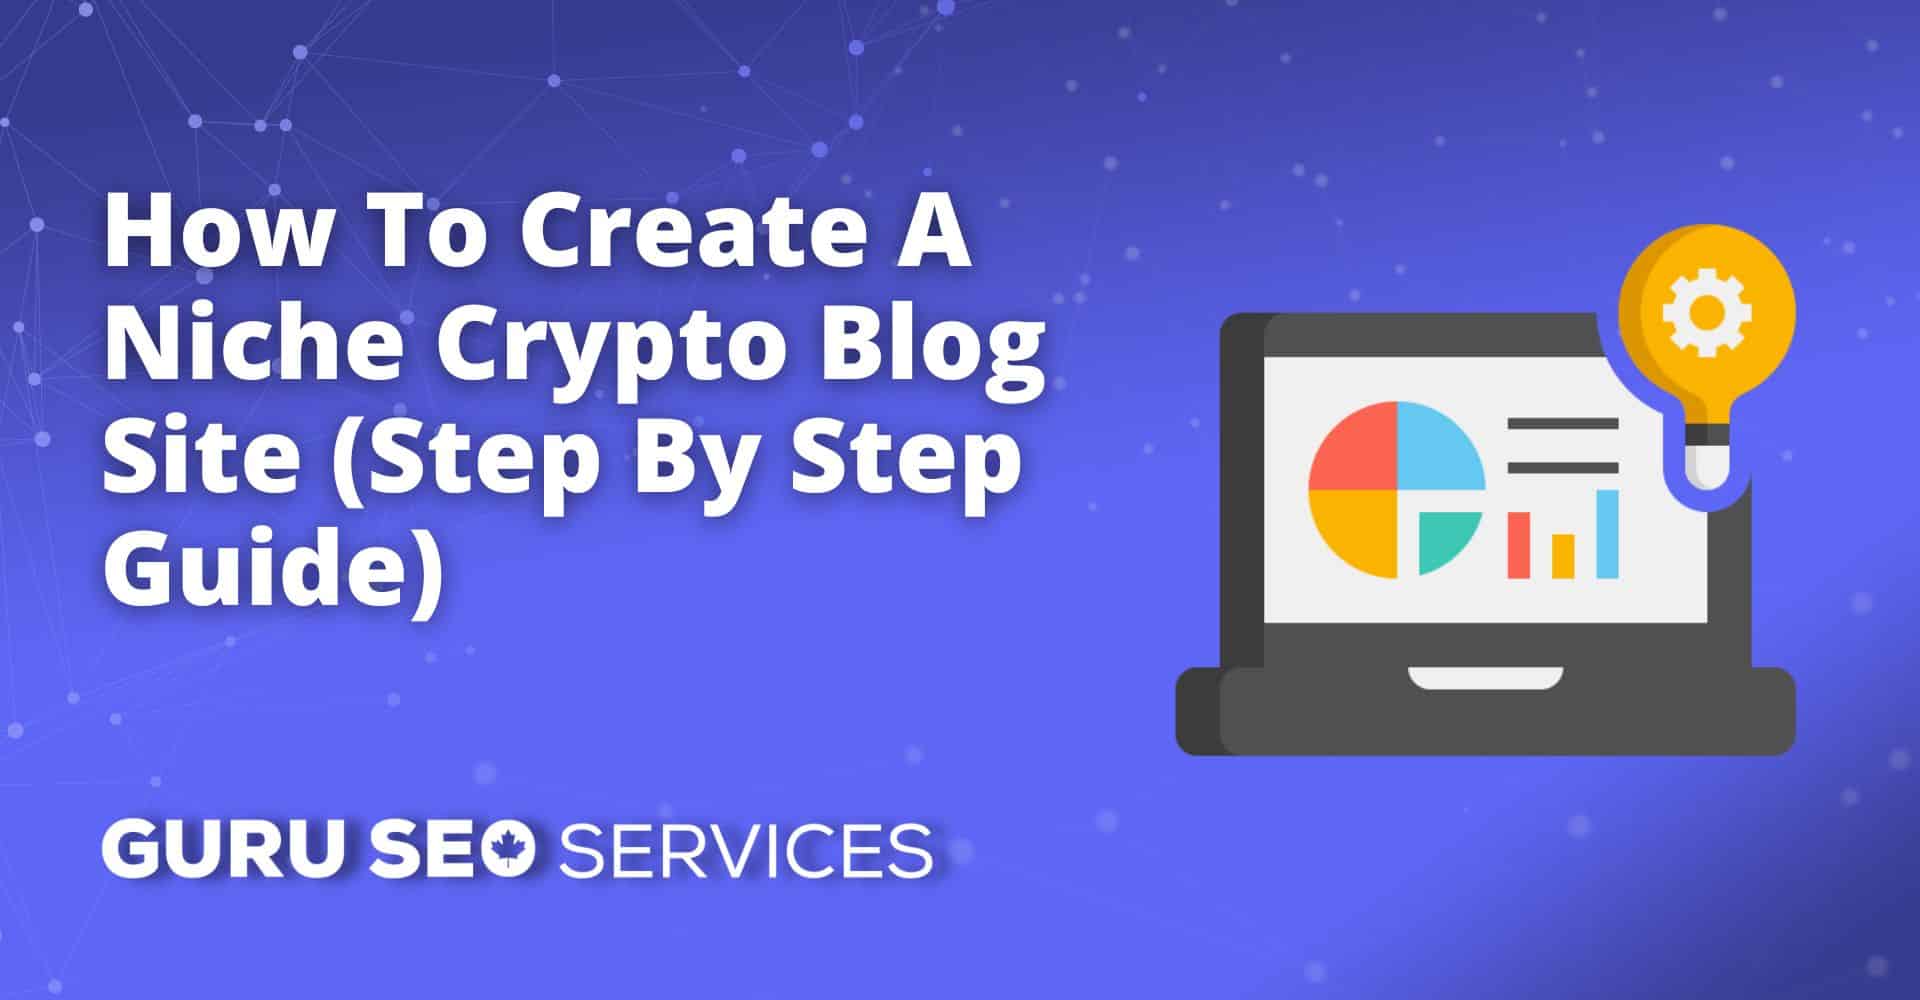 How to create a niche crypto blog site step by step.